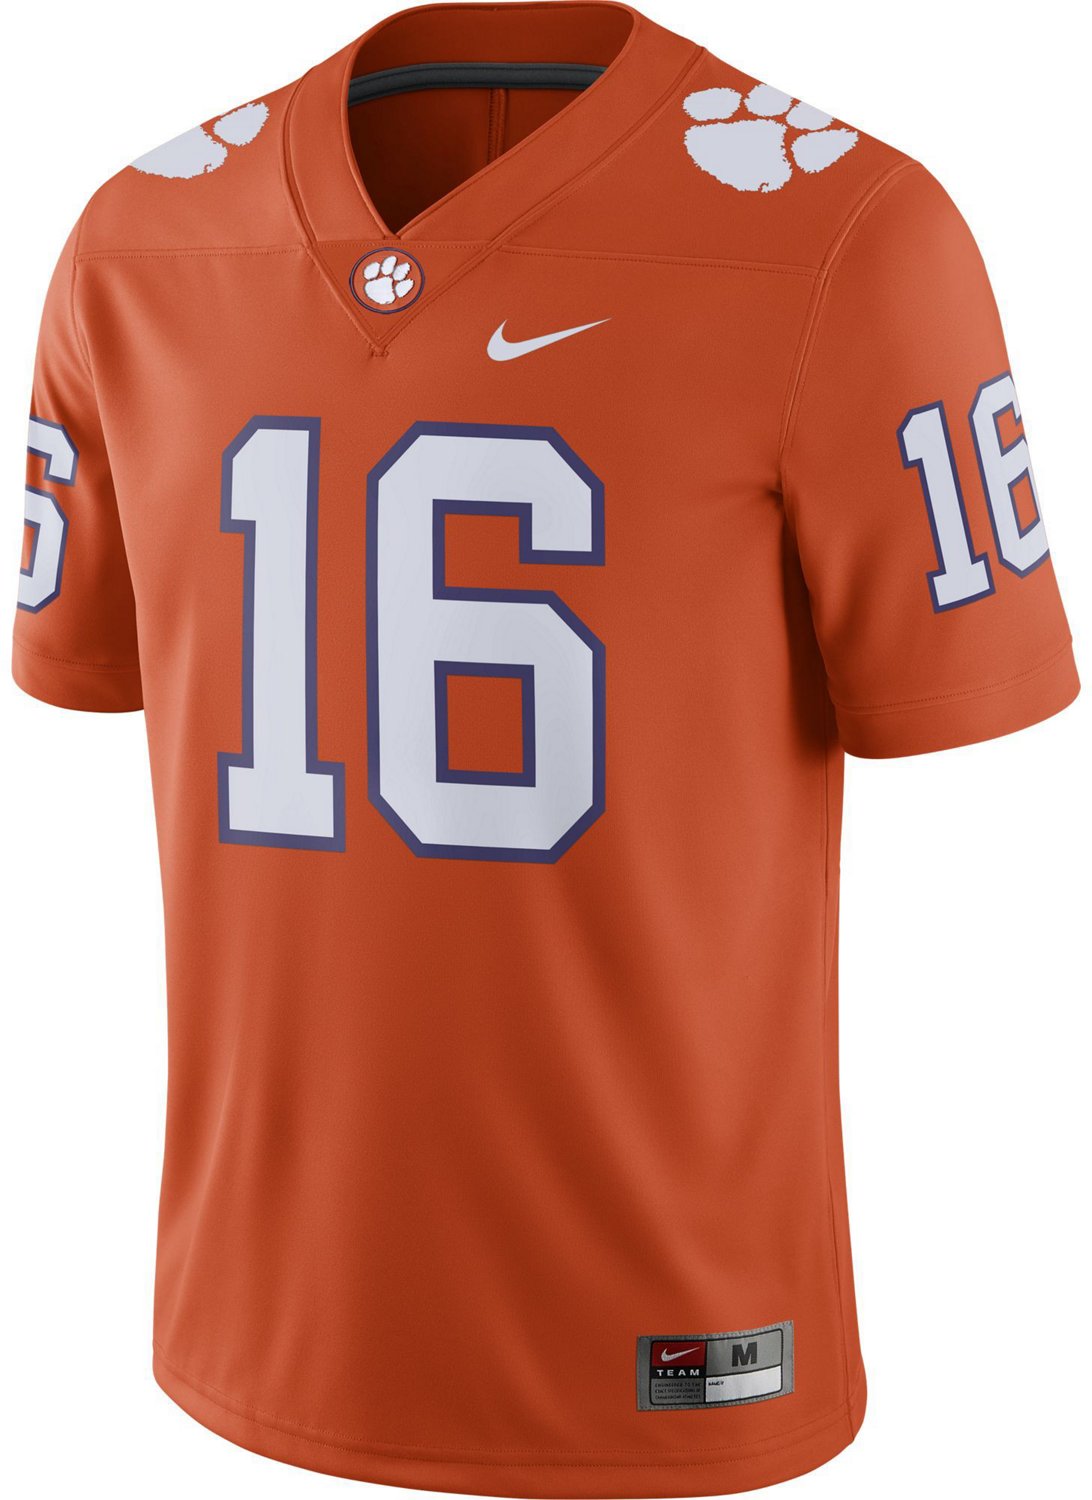 Nike Men's Clemson University Home Game Jersey                                                                                   - view number 1 selected